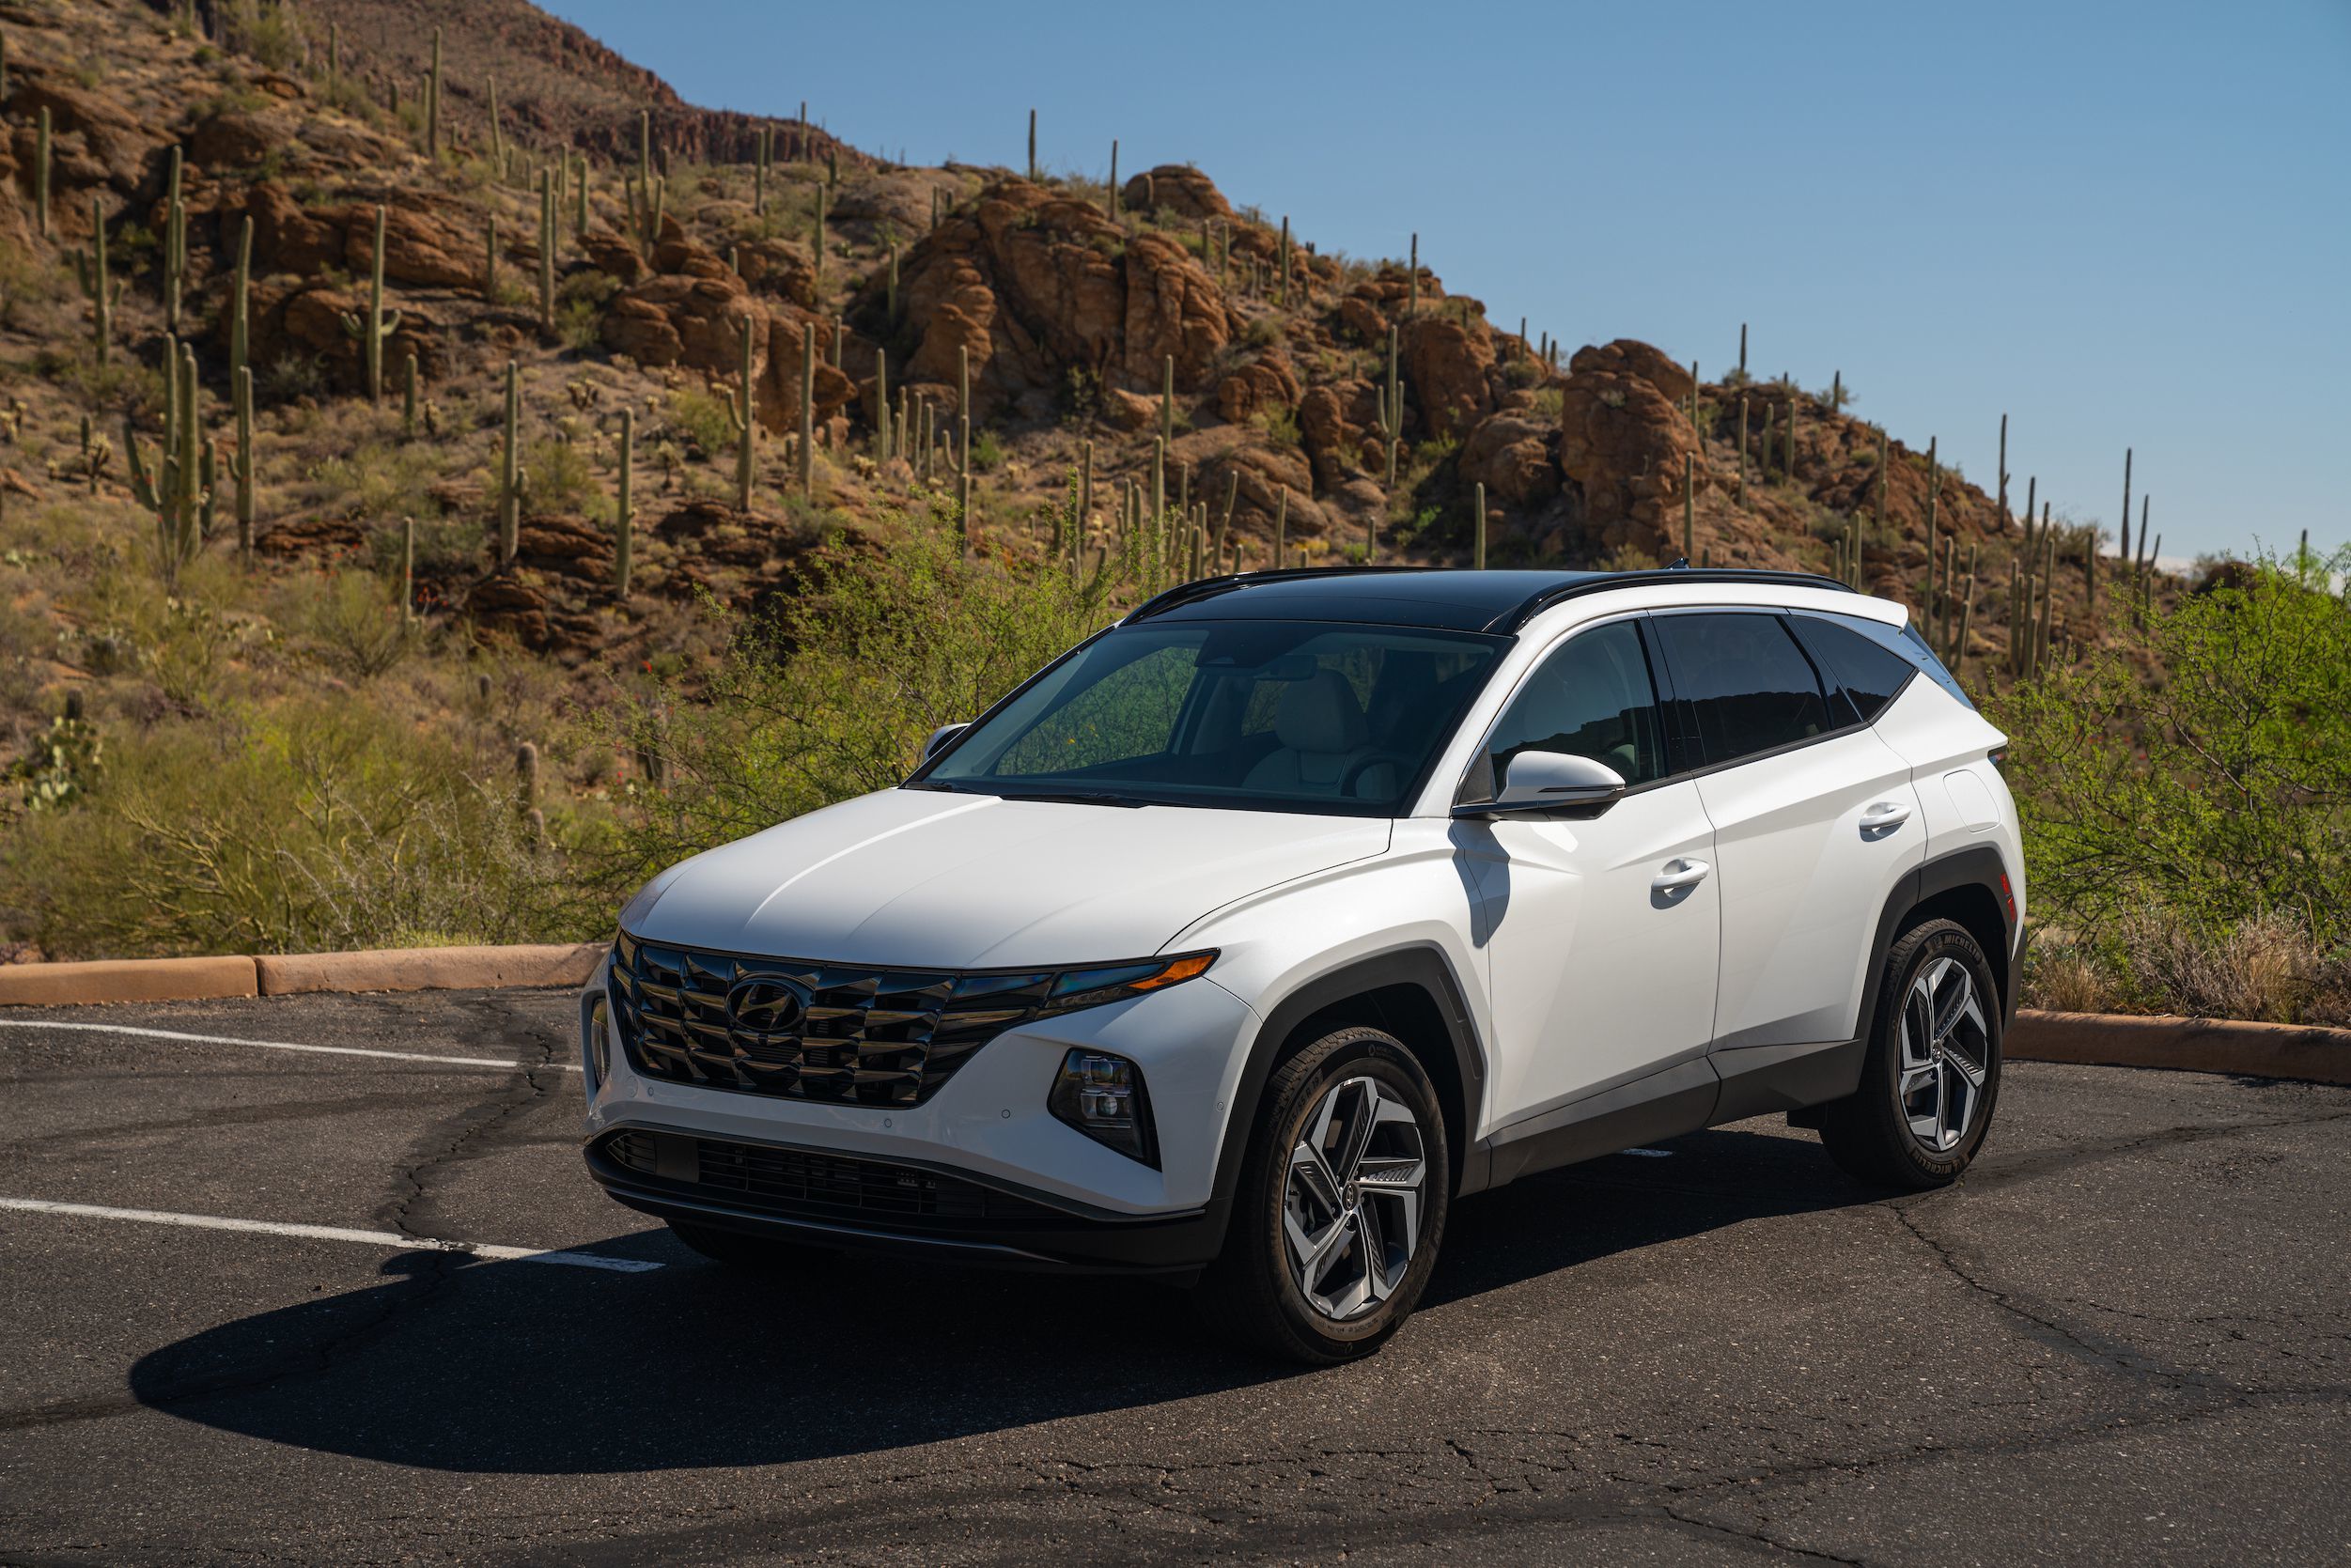 Review: Redesigned 2022 Hyundai Tucson Hybrid offers lively affordability